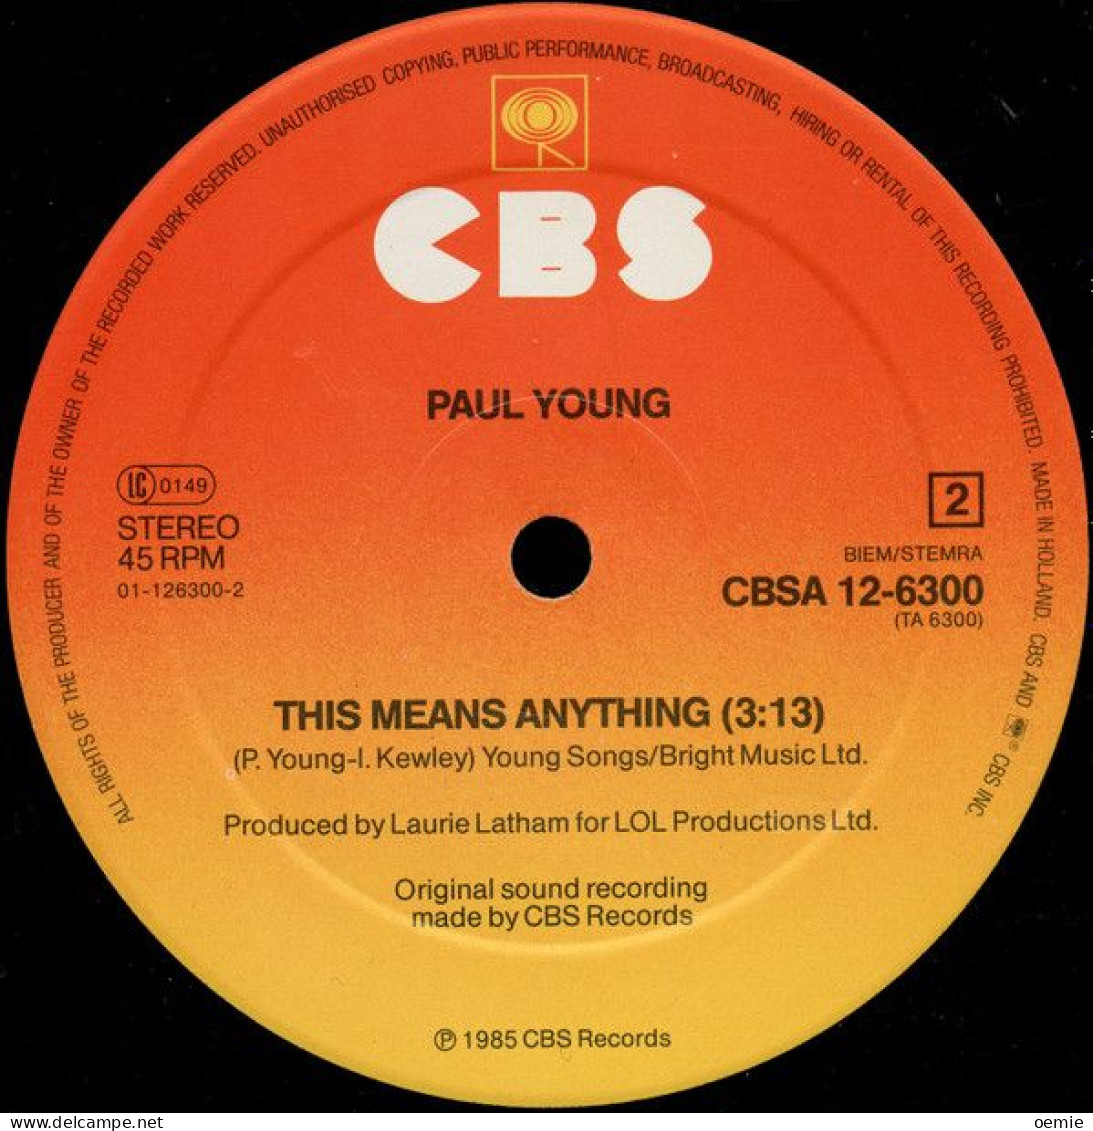 PAUL YOUNG EVERY YOU GO AWAY - 45 Rpm - Maxi-Single